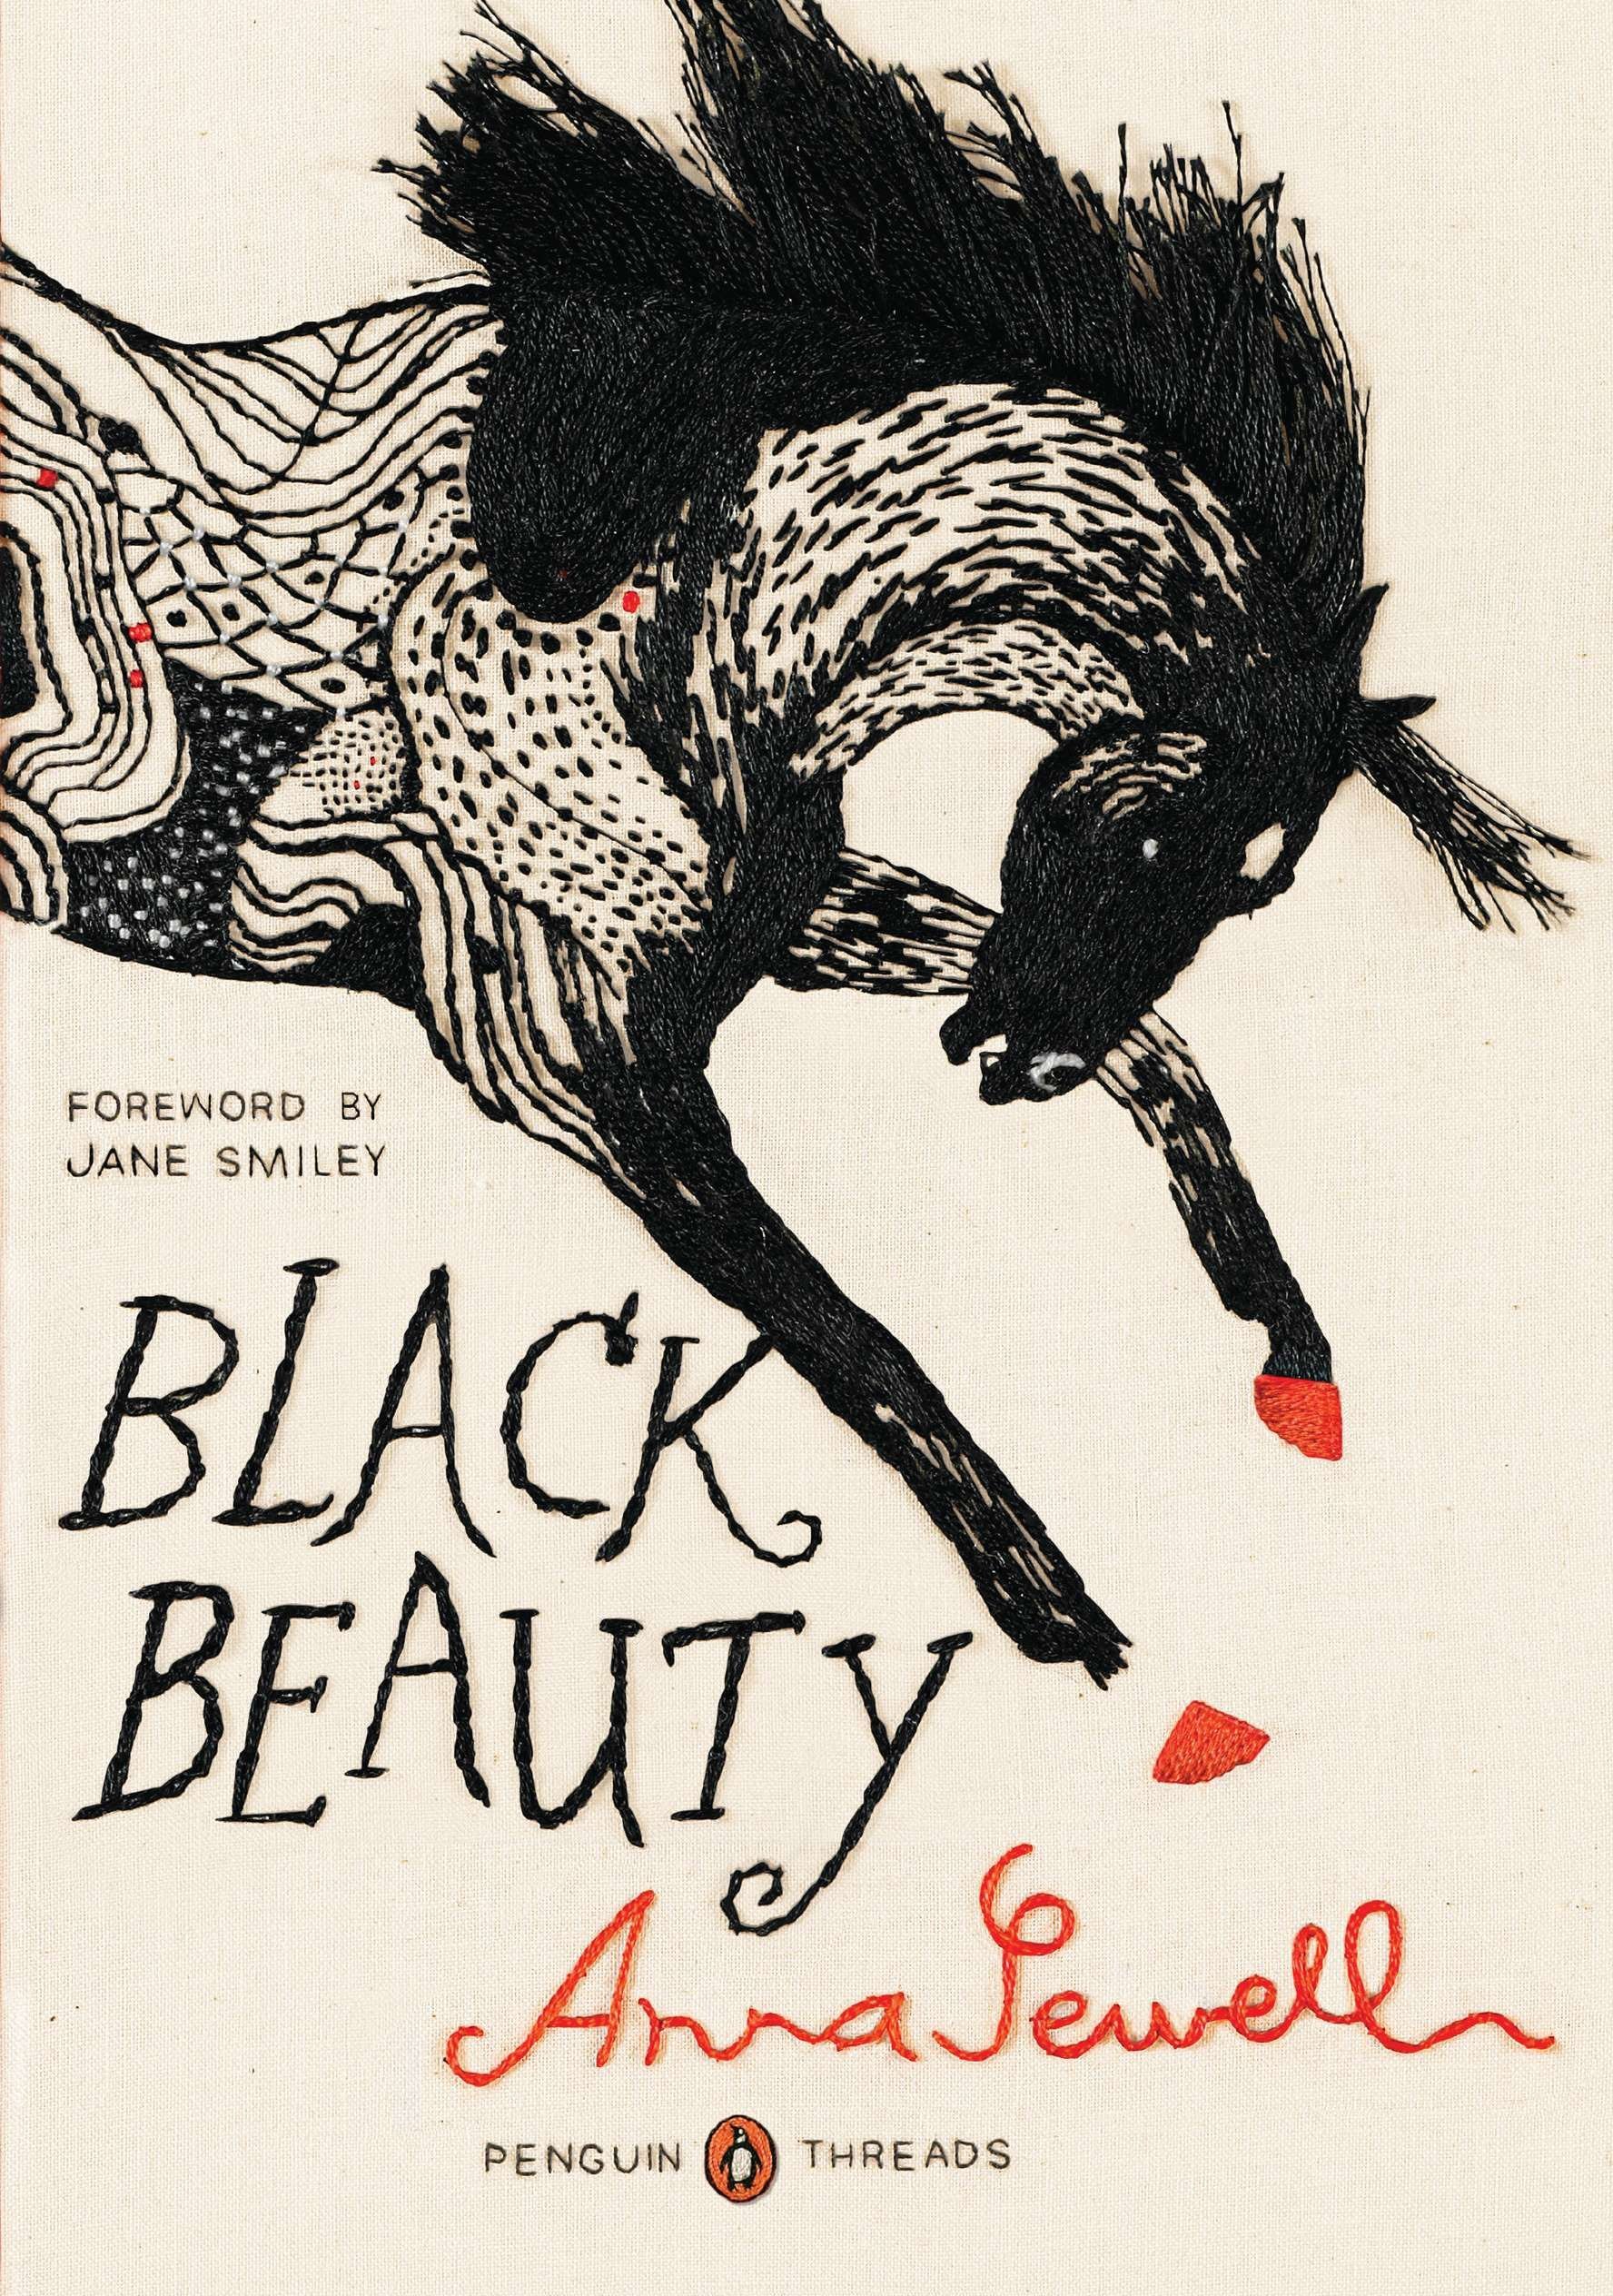 The cover of the Penguin Classics Deluxe Edition of Black Beauty (retrieved through Amazon).